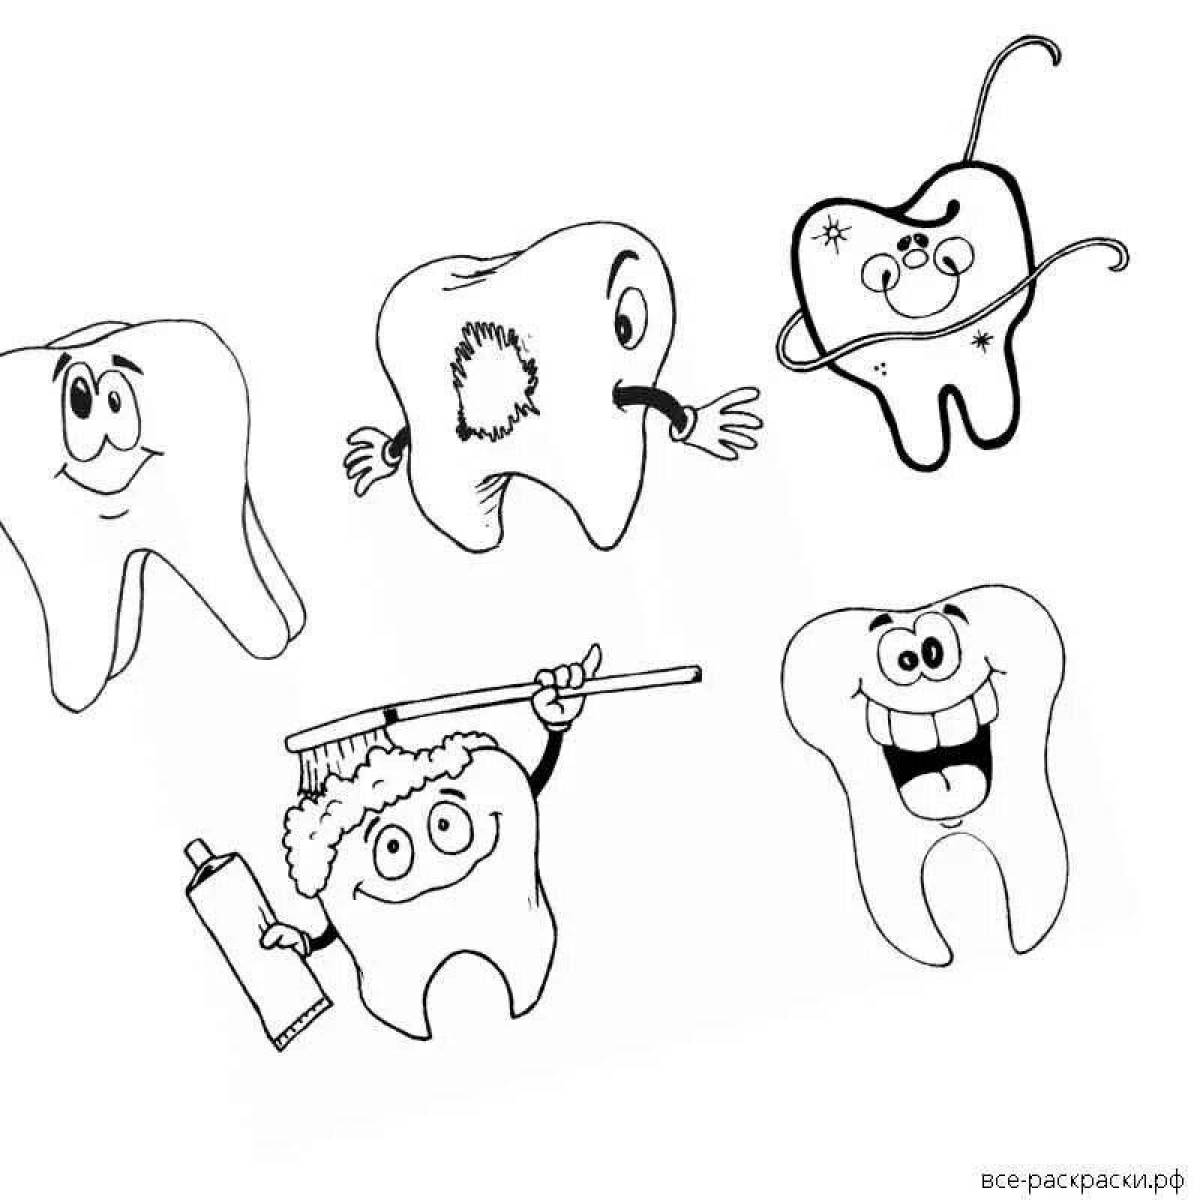 A fun tooth coloring game